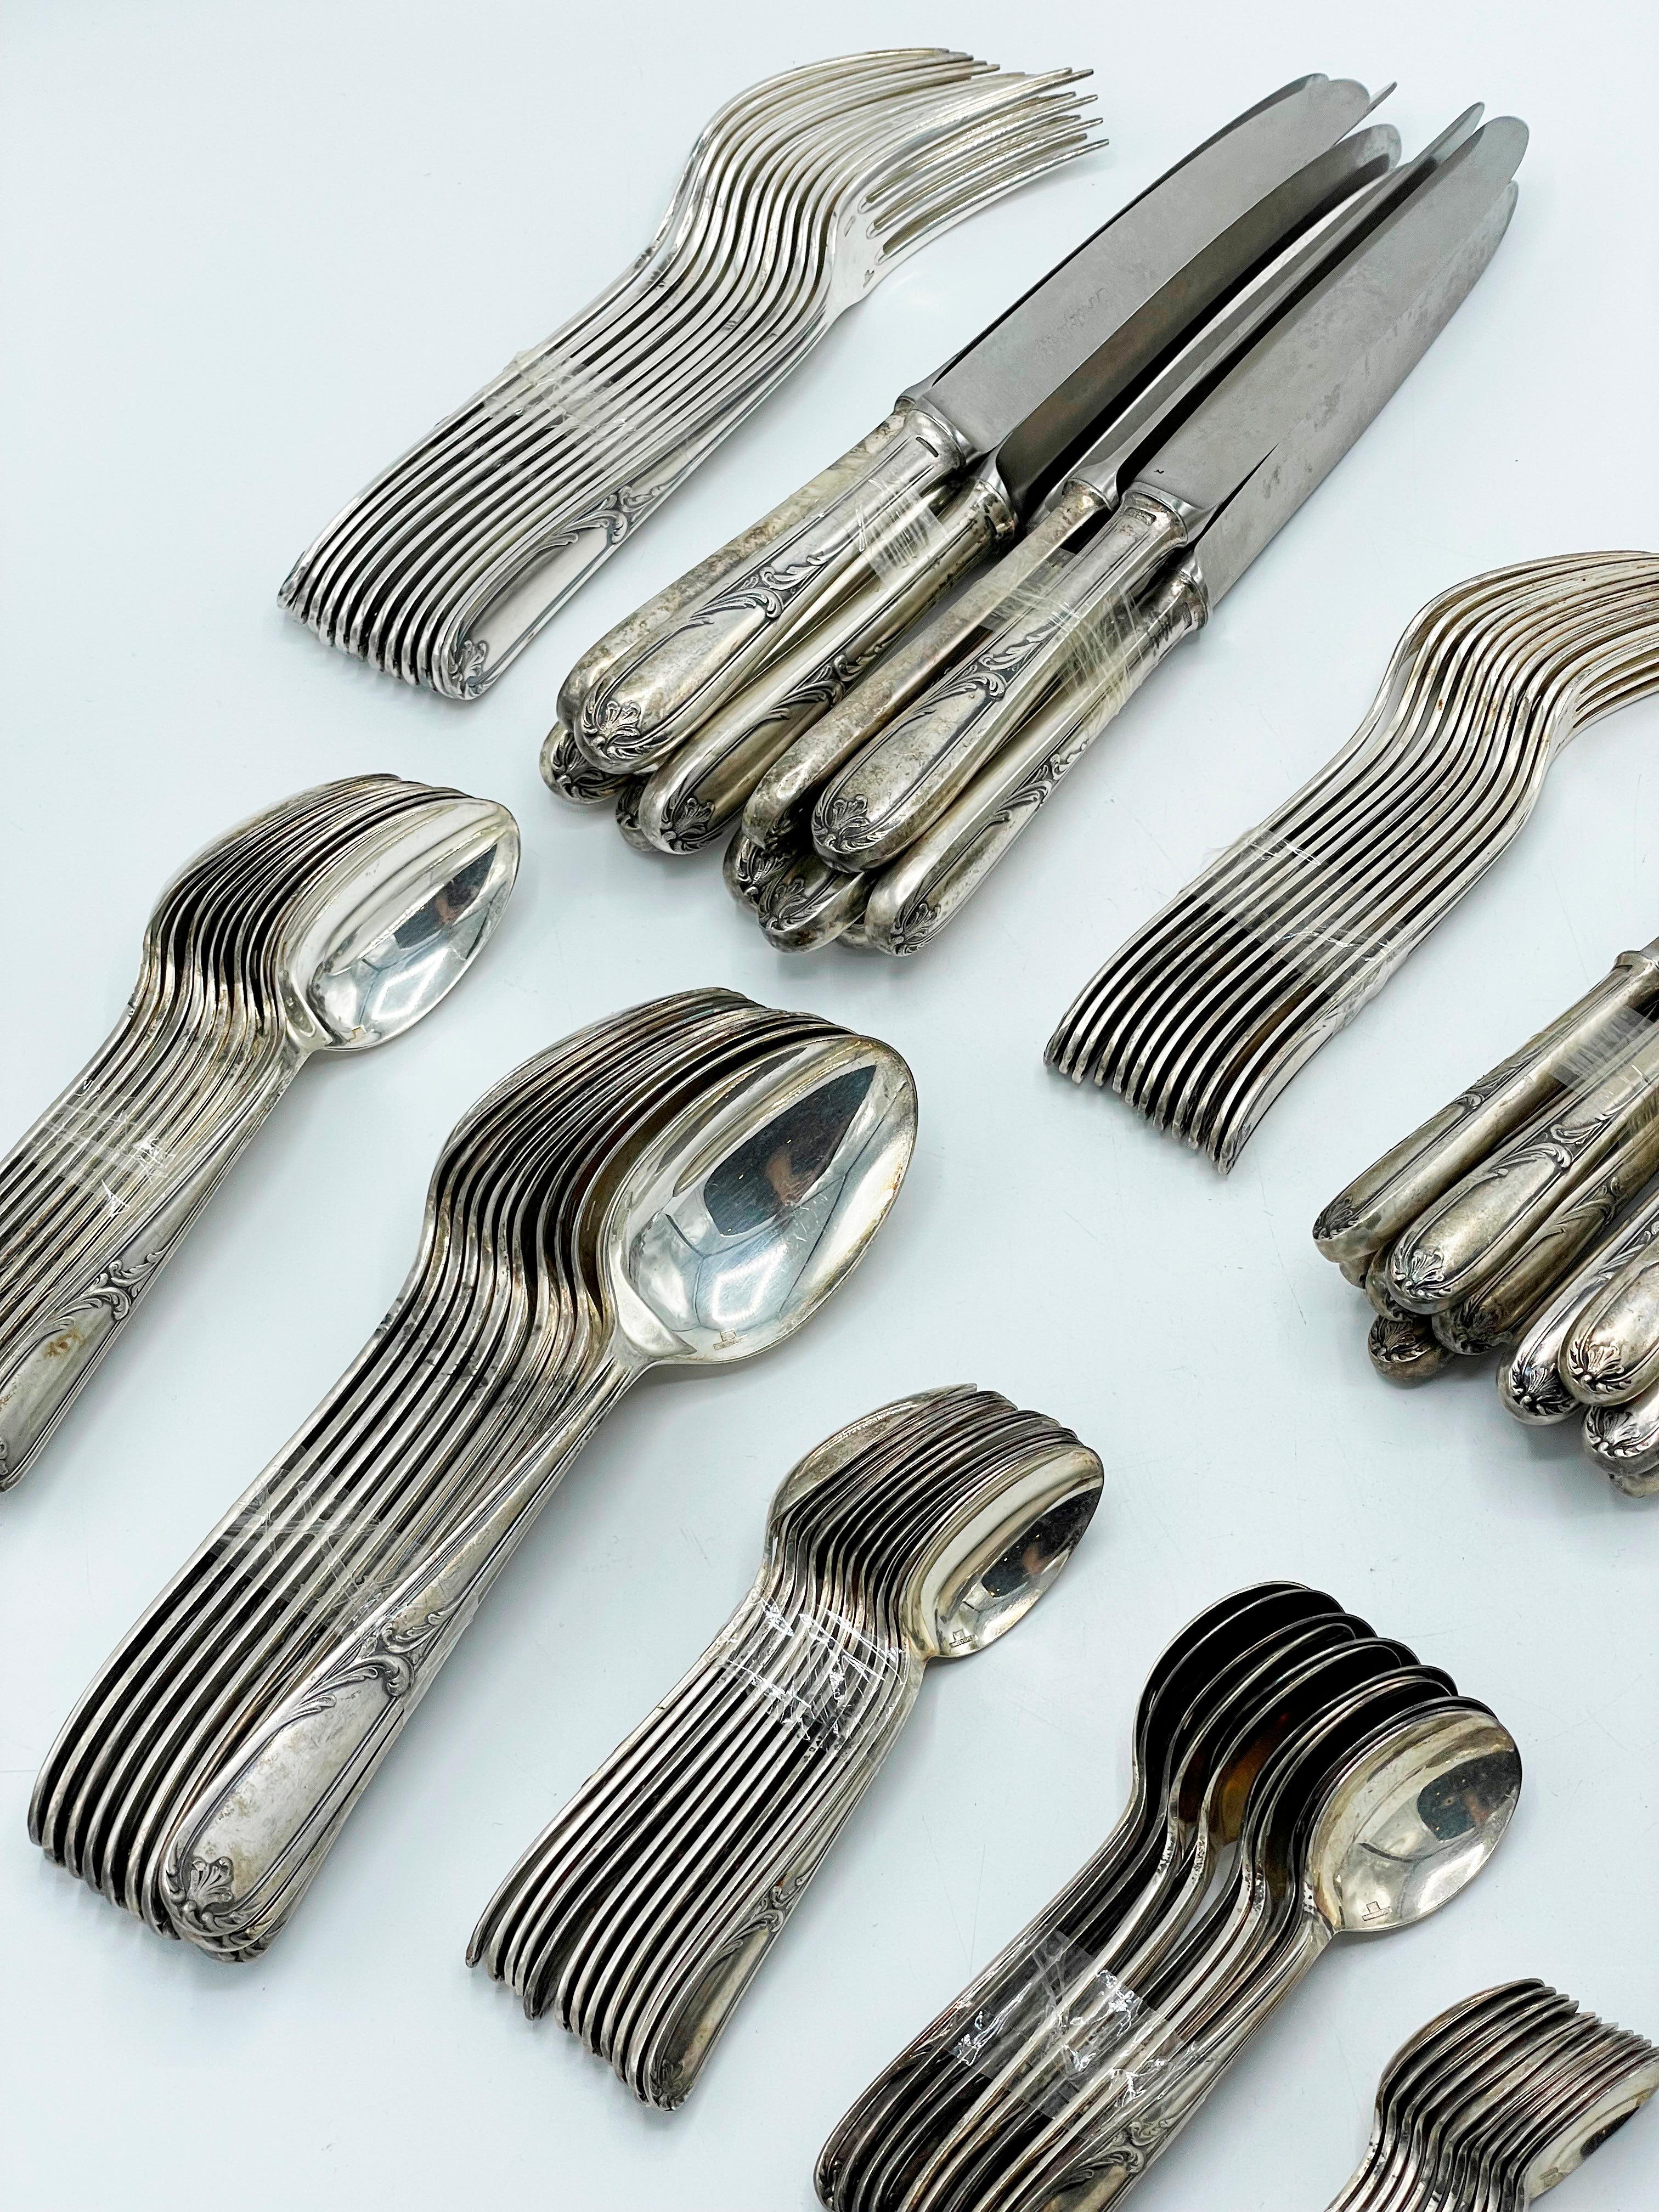 Gorgeous unknown pattern made in Argentina Christofle Silverplate Flatware set 
152 pieces total. This set includes:

12 Dinner Forks - 20 centimeters 
12 Salad Forks - 17 centimeters
12 Sea food Forks - 13,5 centimeters 
12 Dinner knives - 24,5